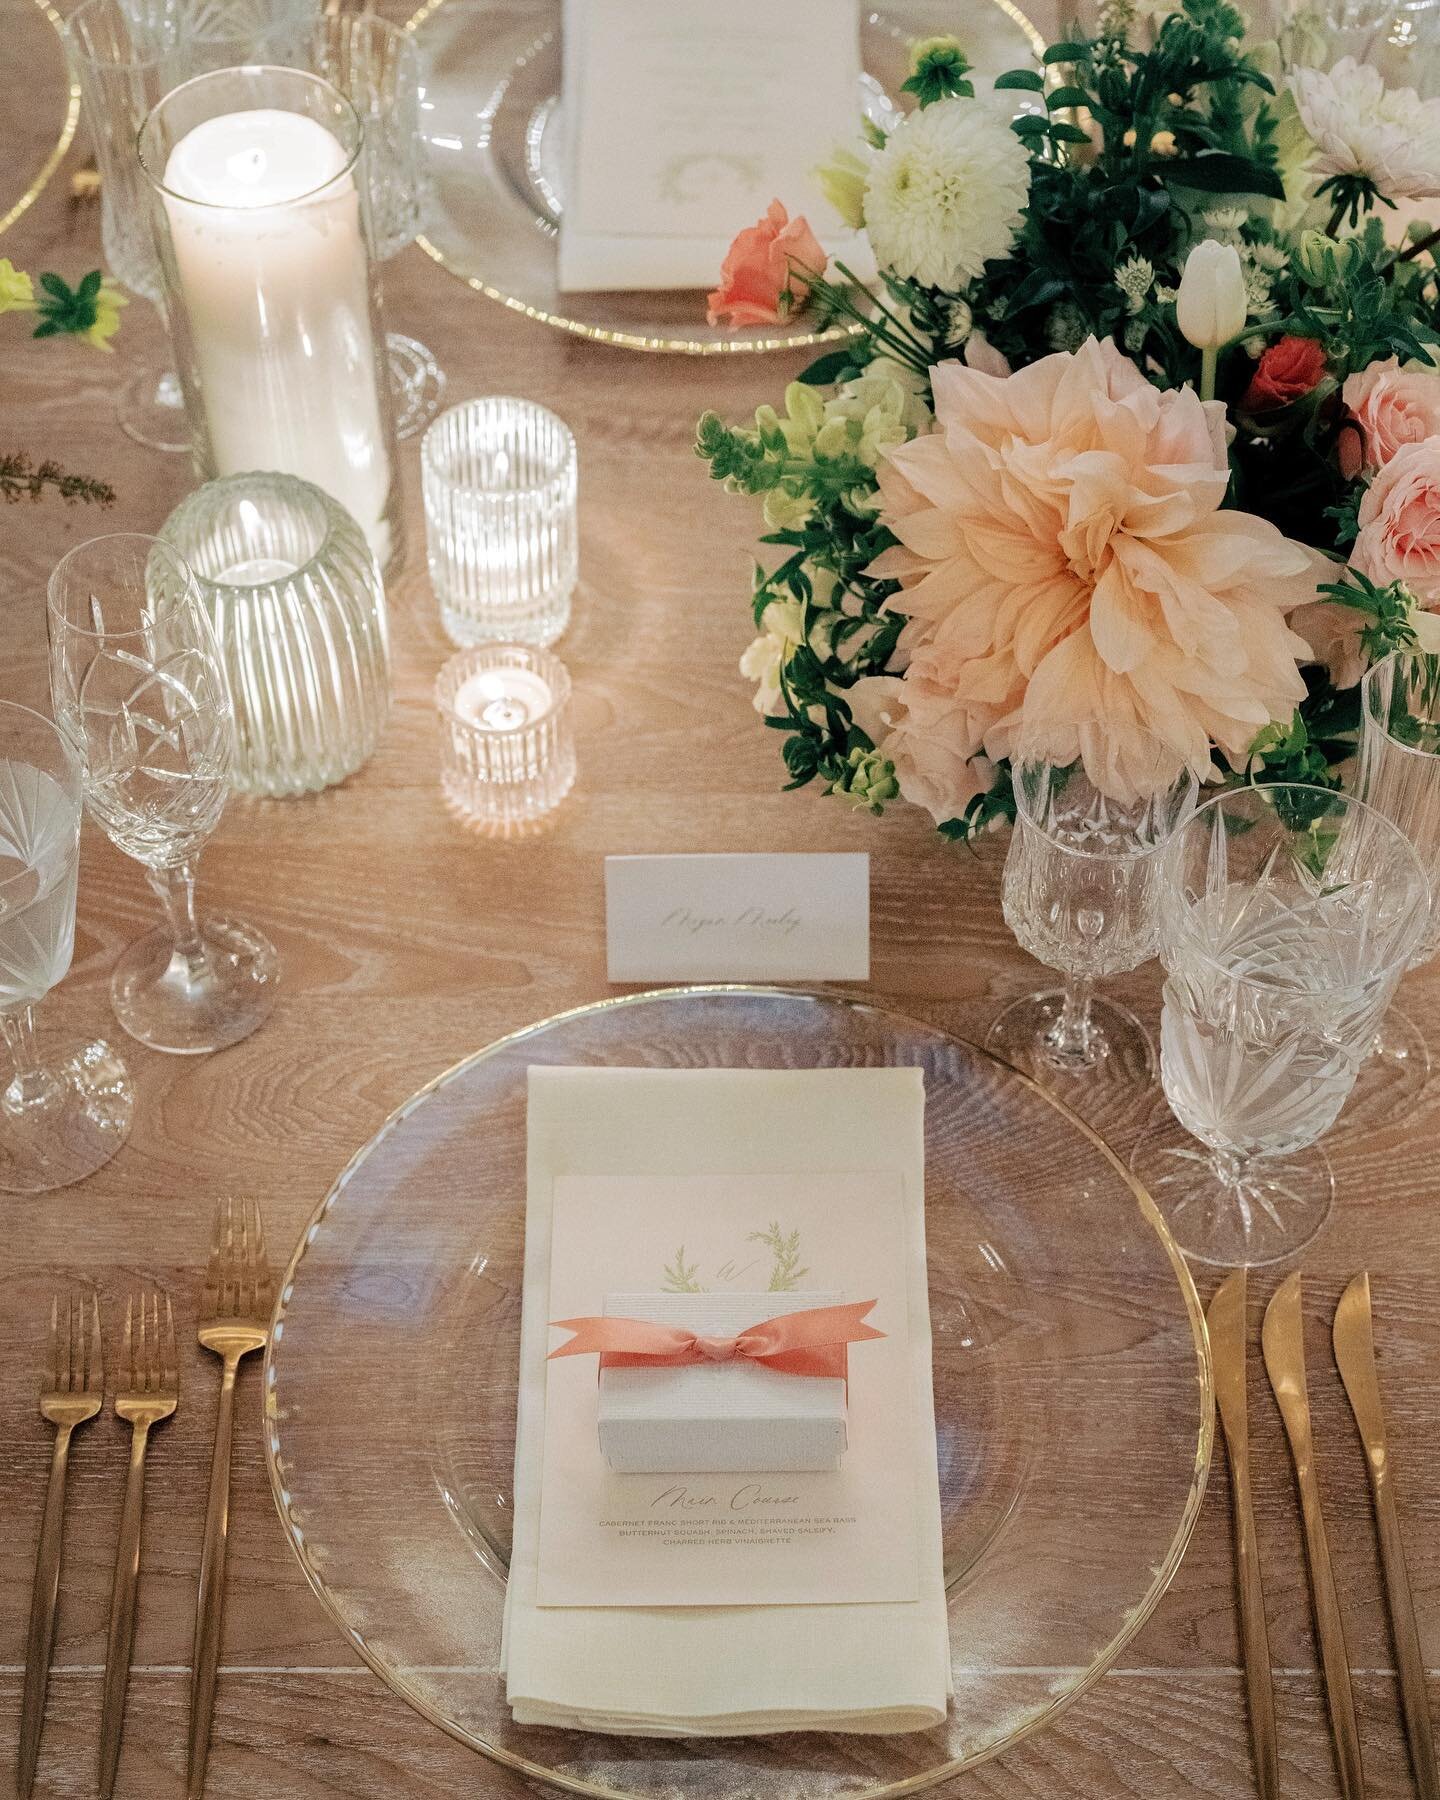 Loving the way the candlelight danced and flickered between the cut crystal stemware, textured glass charger and fluted votive holders. ✨ #innatperrycabin #seaislandweddings #newportwedding #newportweddings #wauwinet #thewauwinet #rosecliffwedding #r